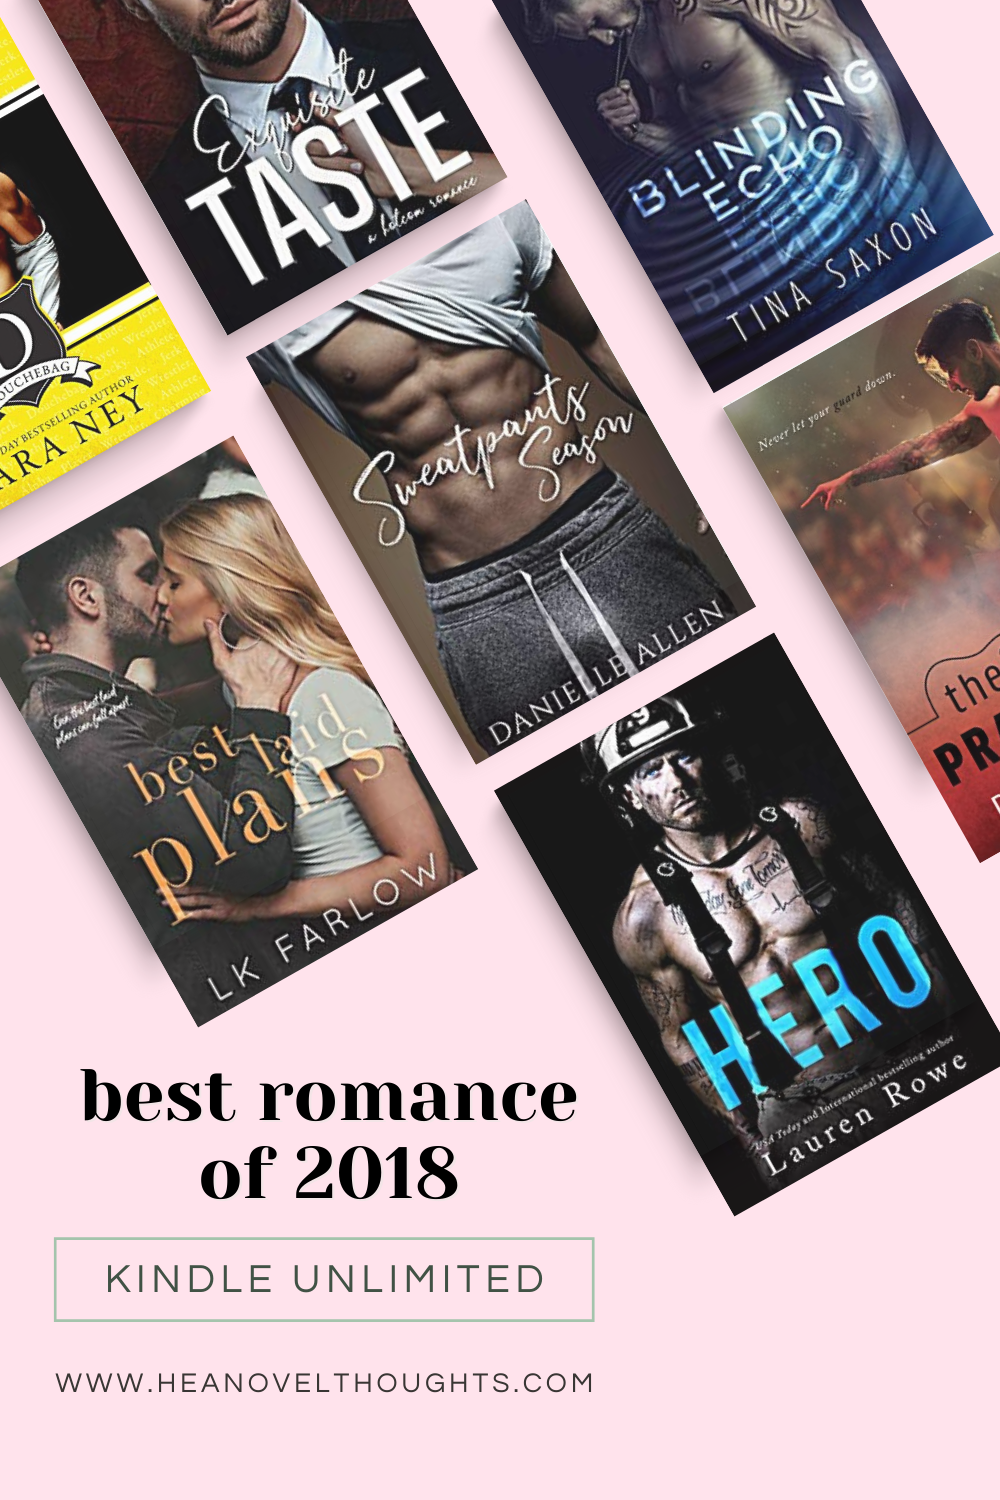 The Best Kindle Unlimited Romance Books of 2018